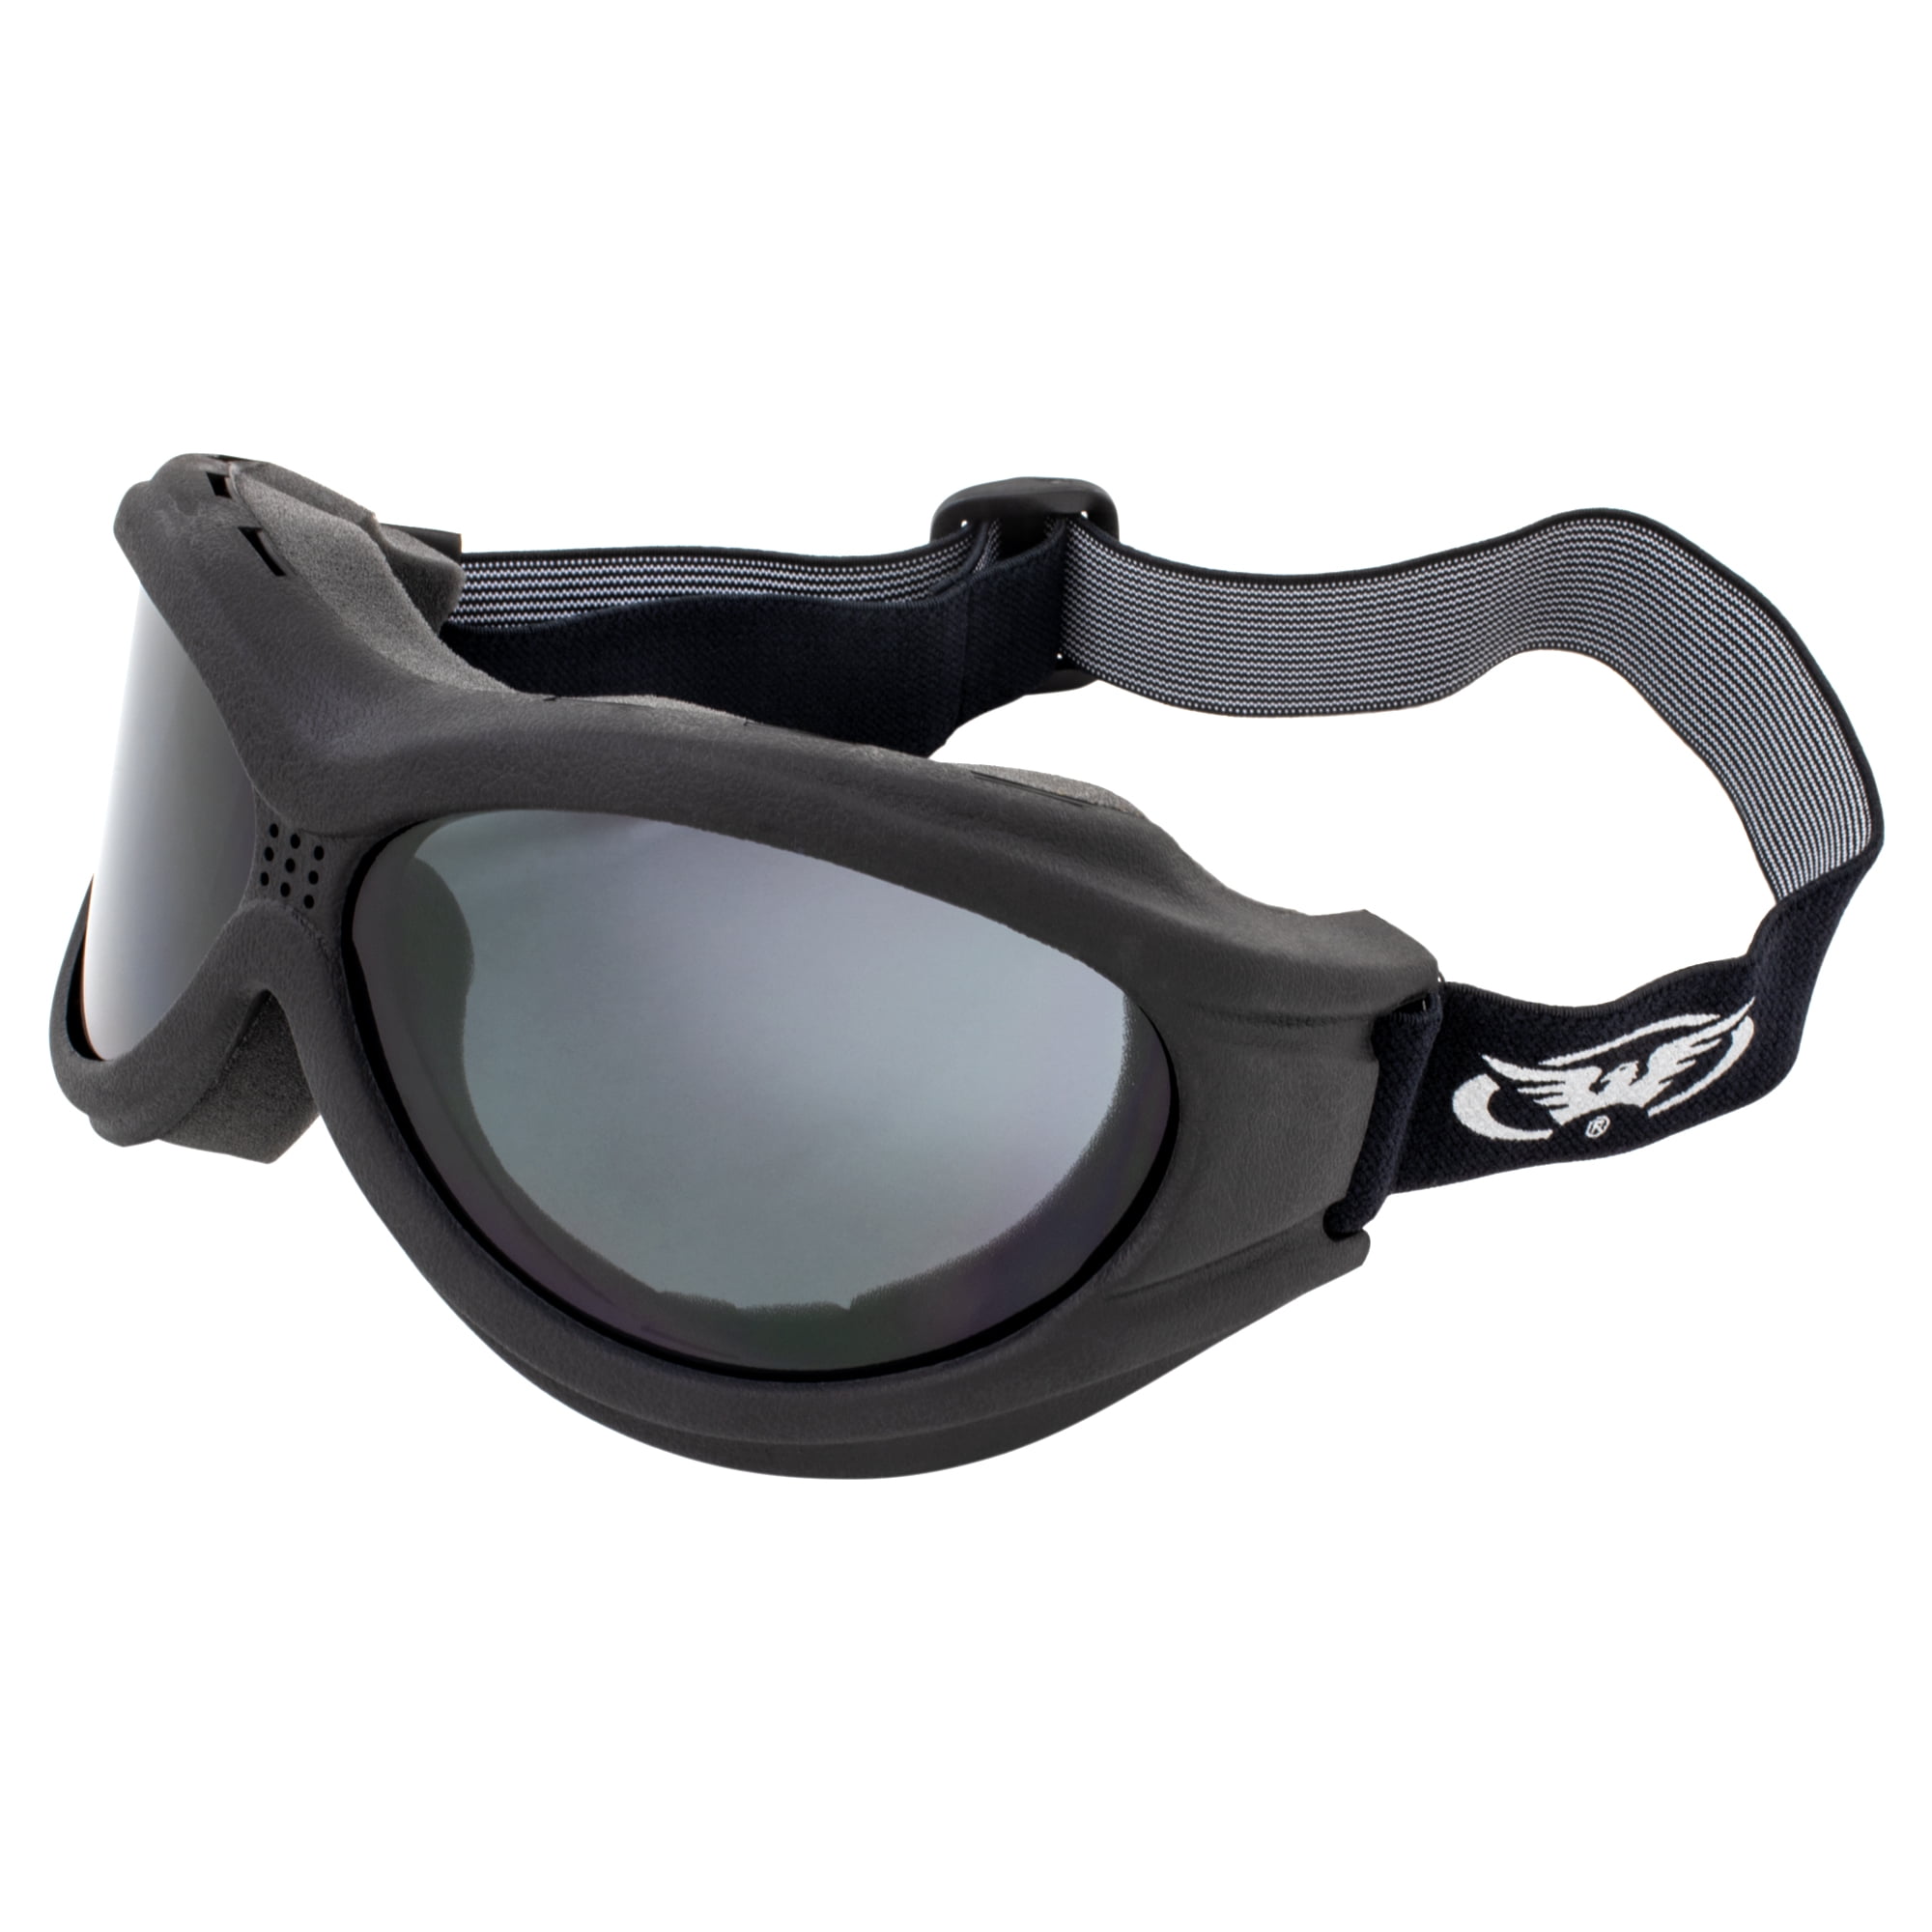 Flexible Anti-Fog Motorcycle Goggles Fit Over RX Prescription Glasses Fitover 